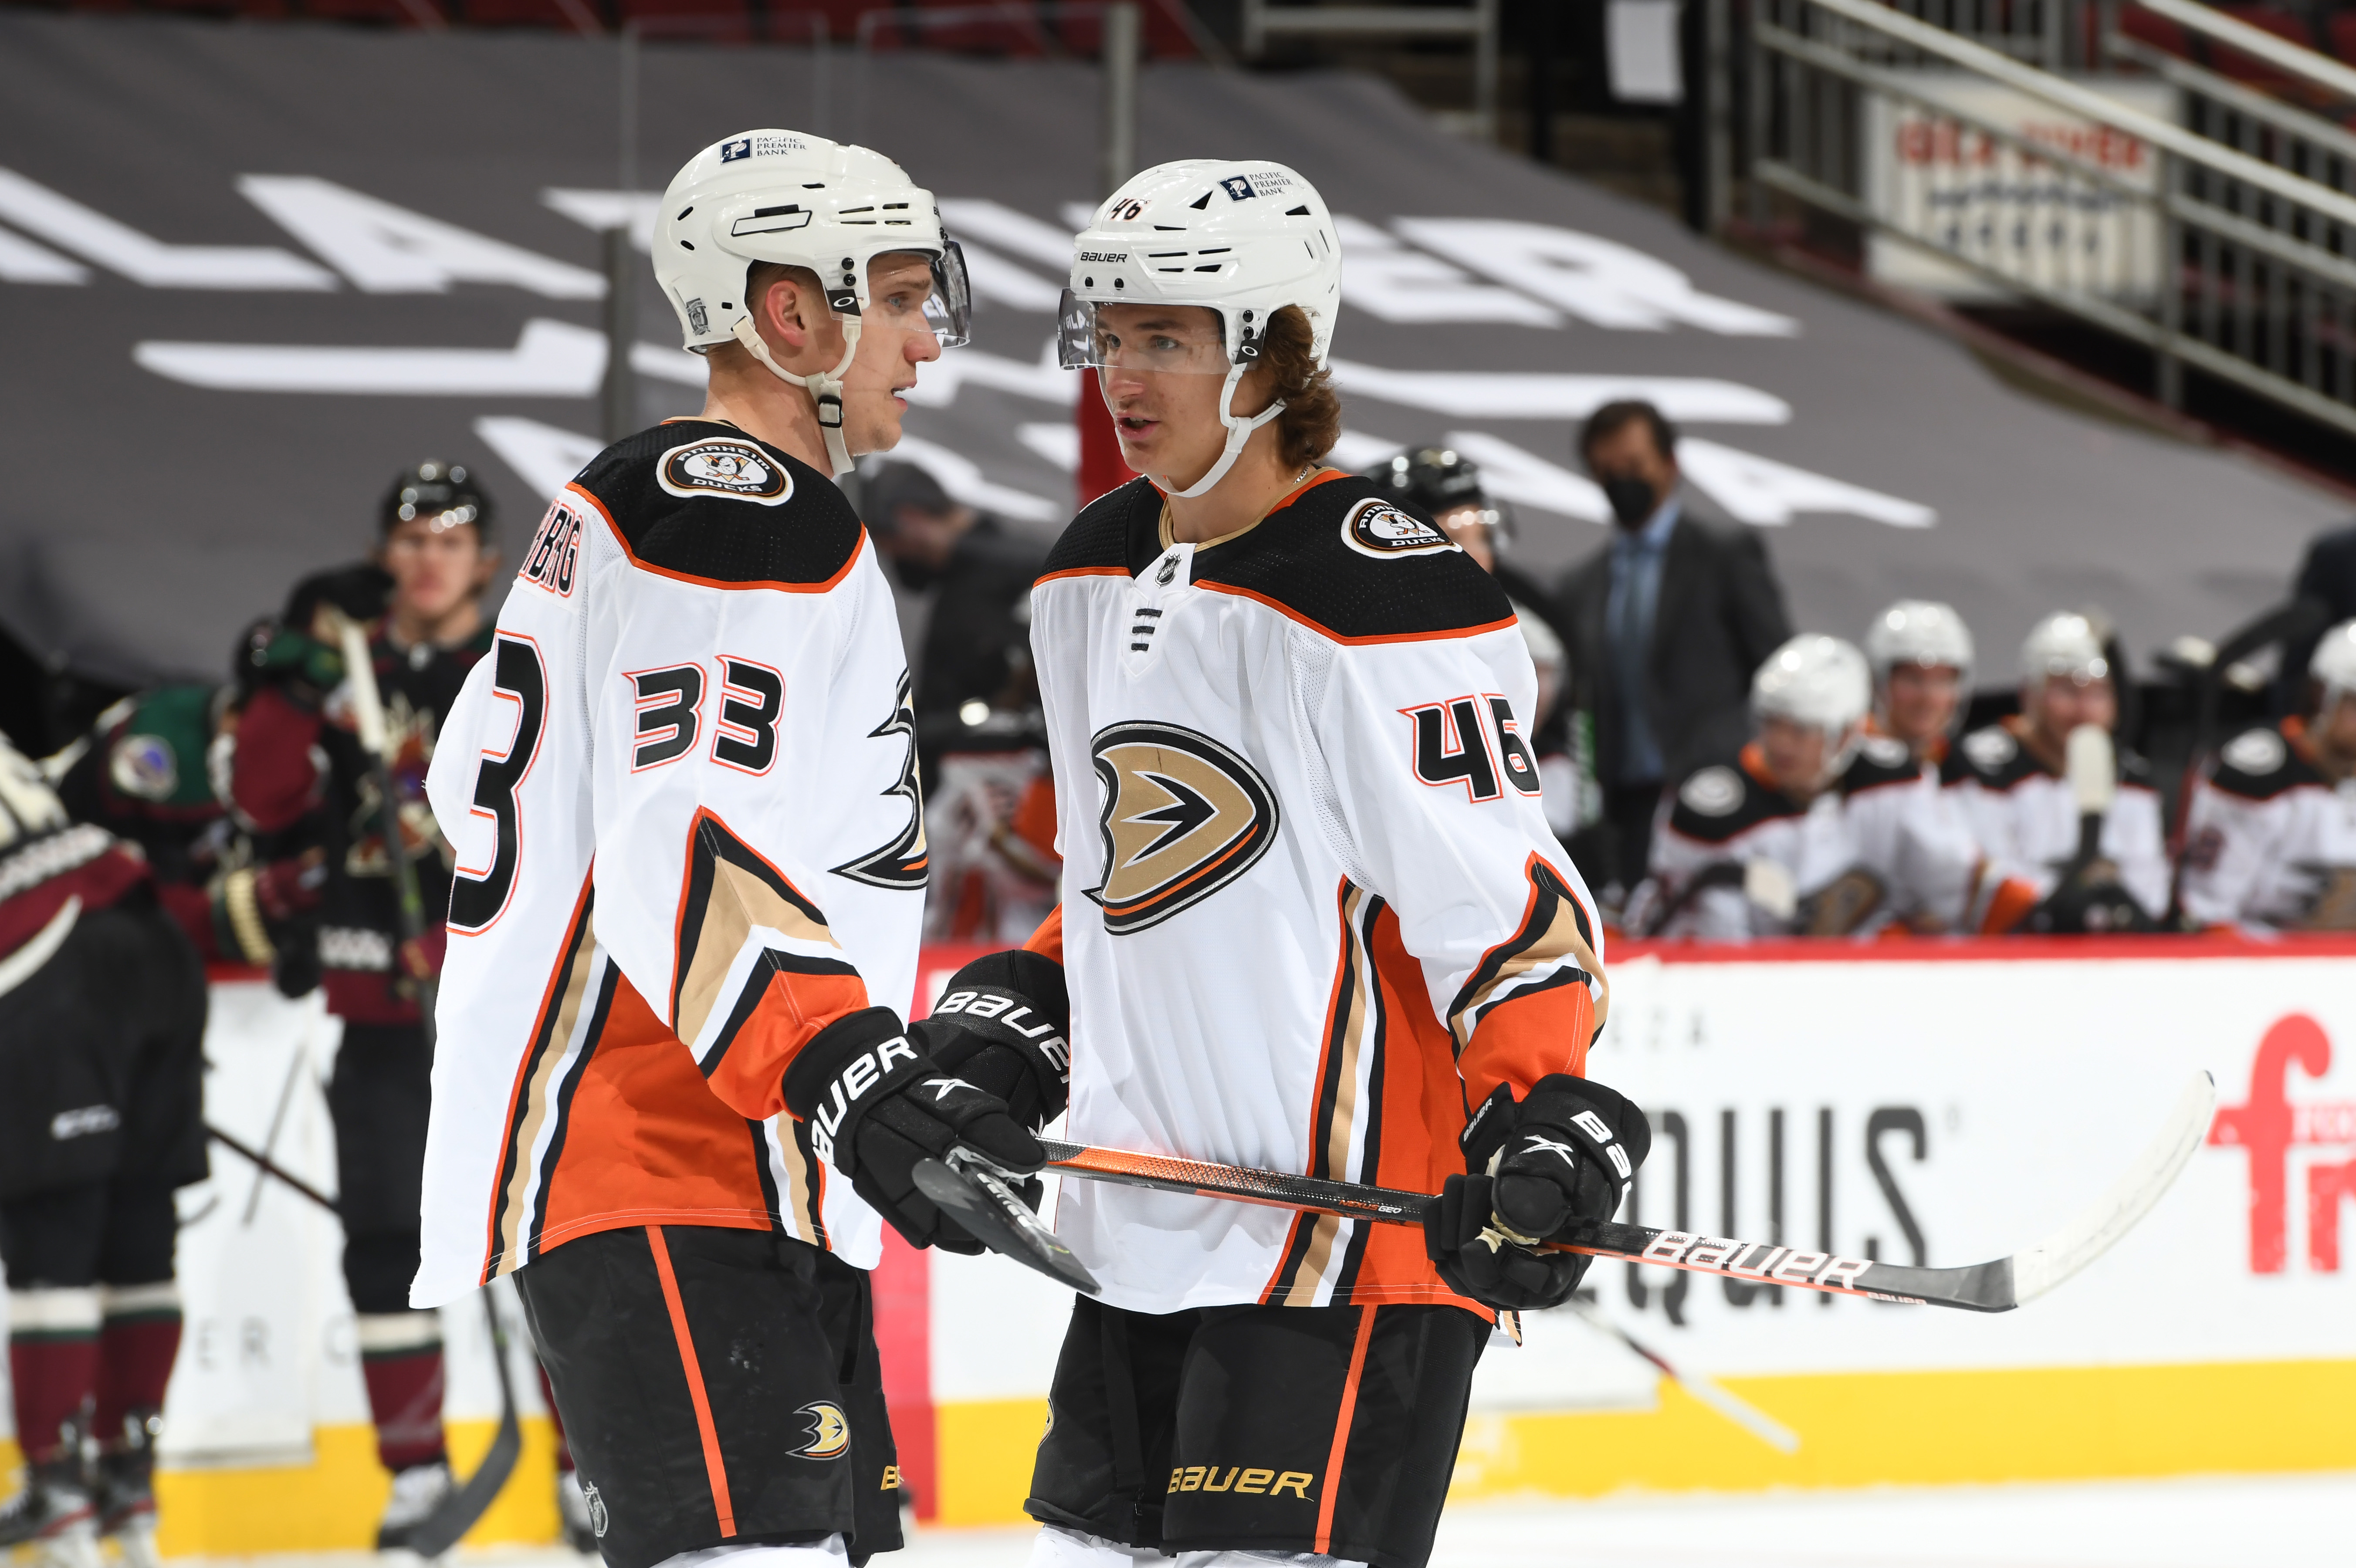 Trevor Zegras #46 of the Anaheim Ducks talks with Jakob Silfverberg #33 prior to a face off against the Arizona Coyotes at Gila River Arena on February 22, 2021 in Glendale, Arizona. The game marked the first career NHL game for Zegras.